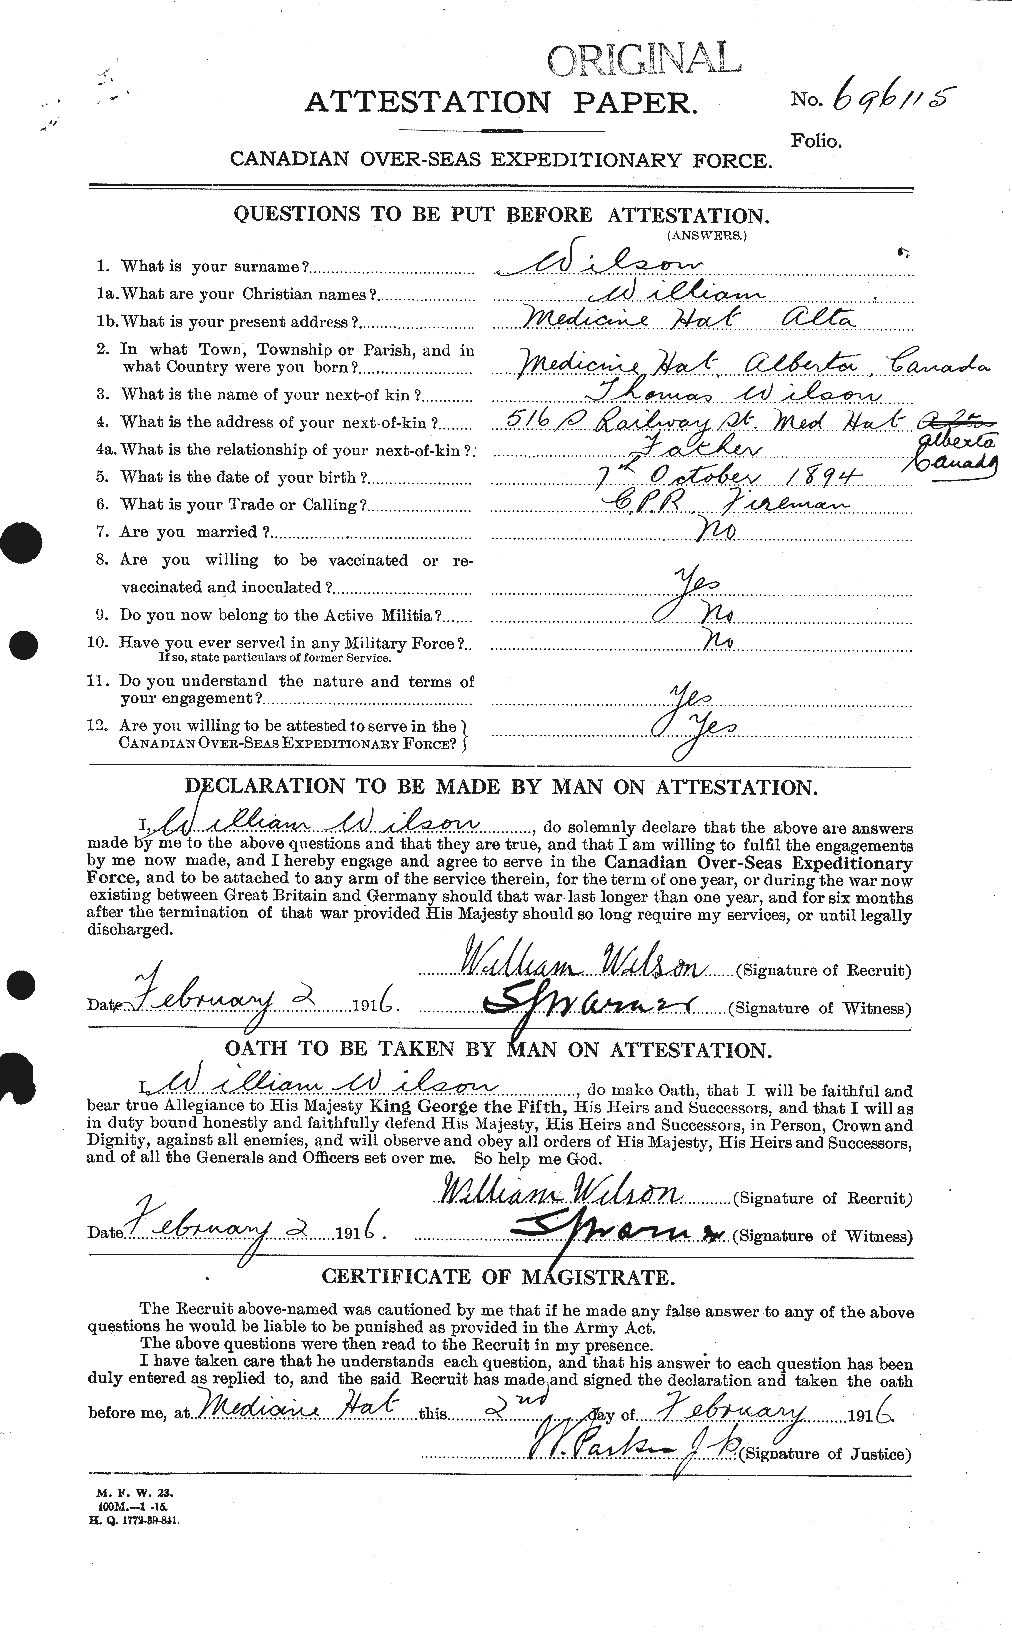 Personnel Records of the First World War - CEF 681865a